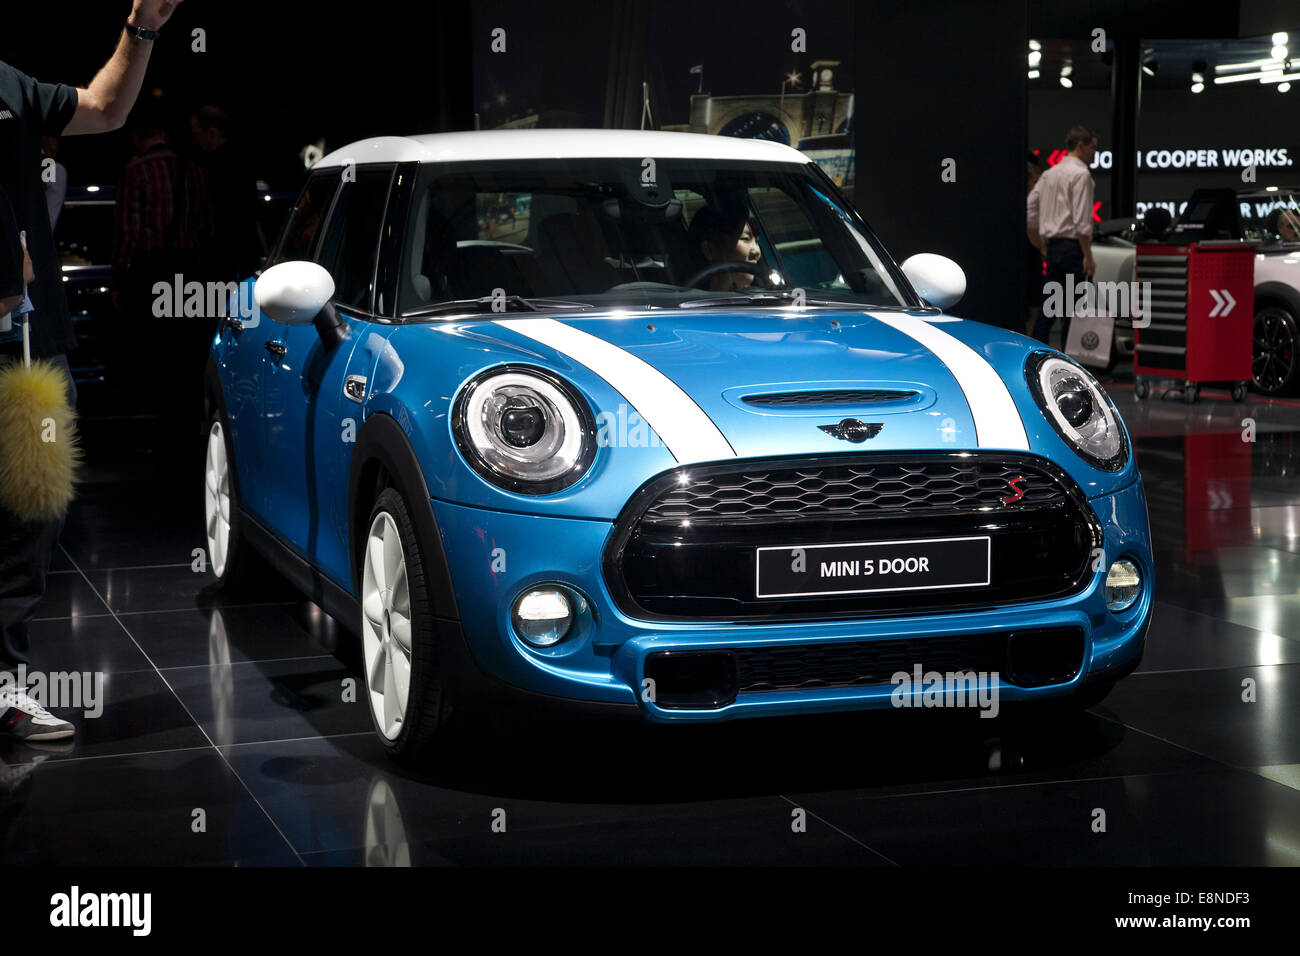 MINI Cooper S 5-Door - Your Funky HD Wallpapers Are Served - autoevolution